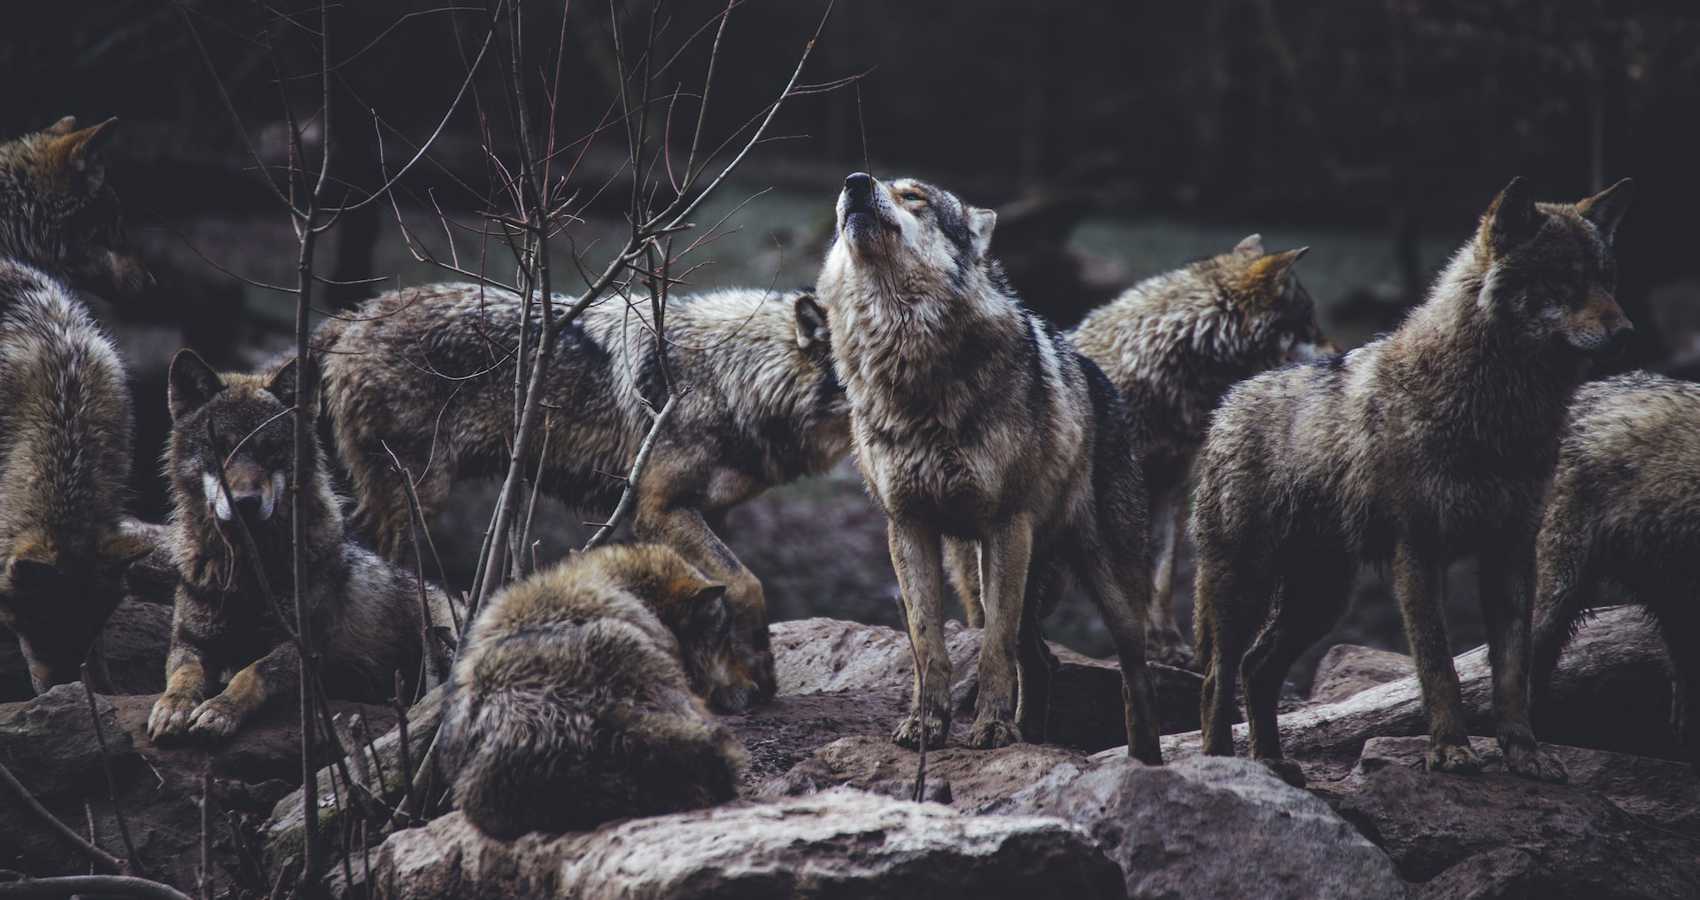 Wolves and Flies, flash fiction by Tim Law at Spillwords.com